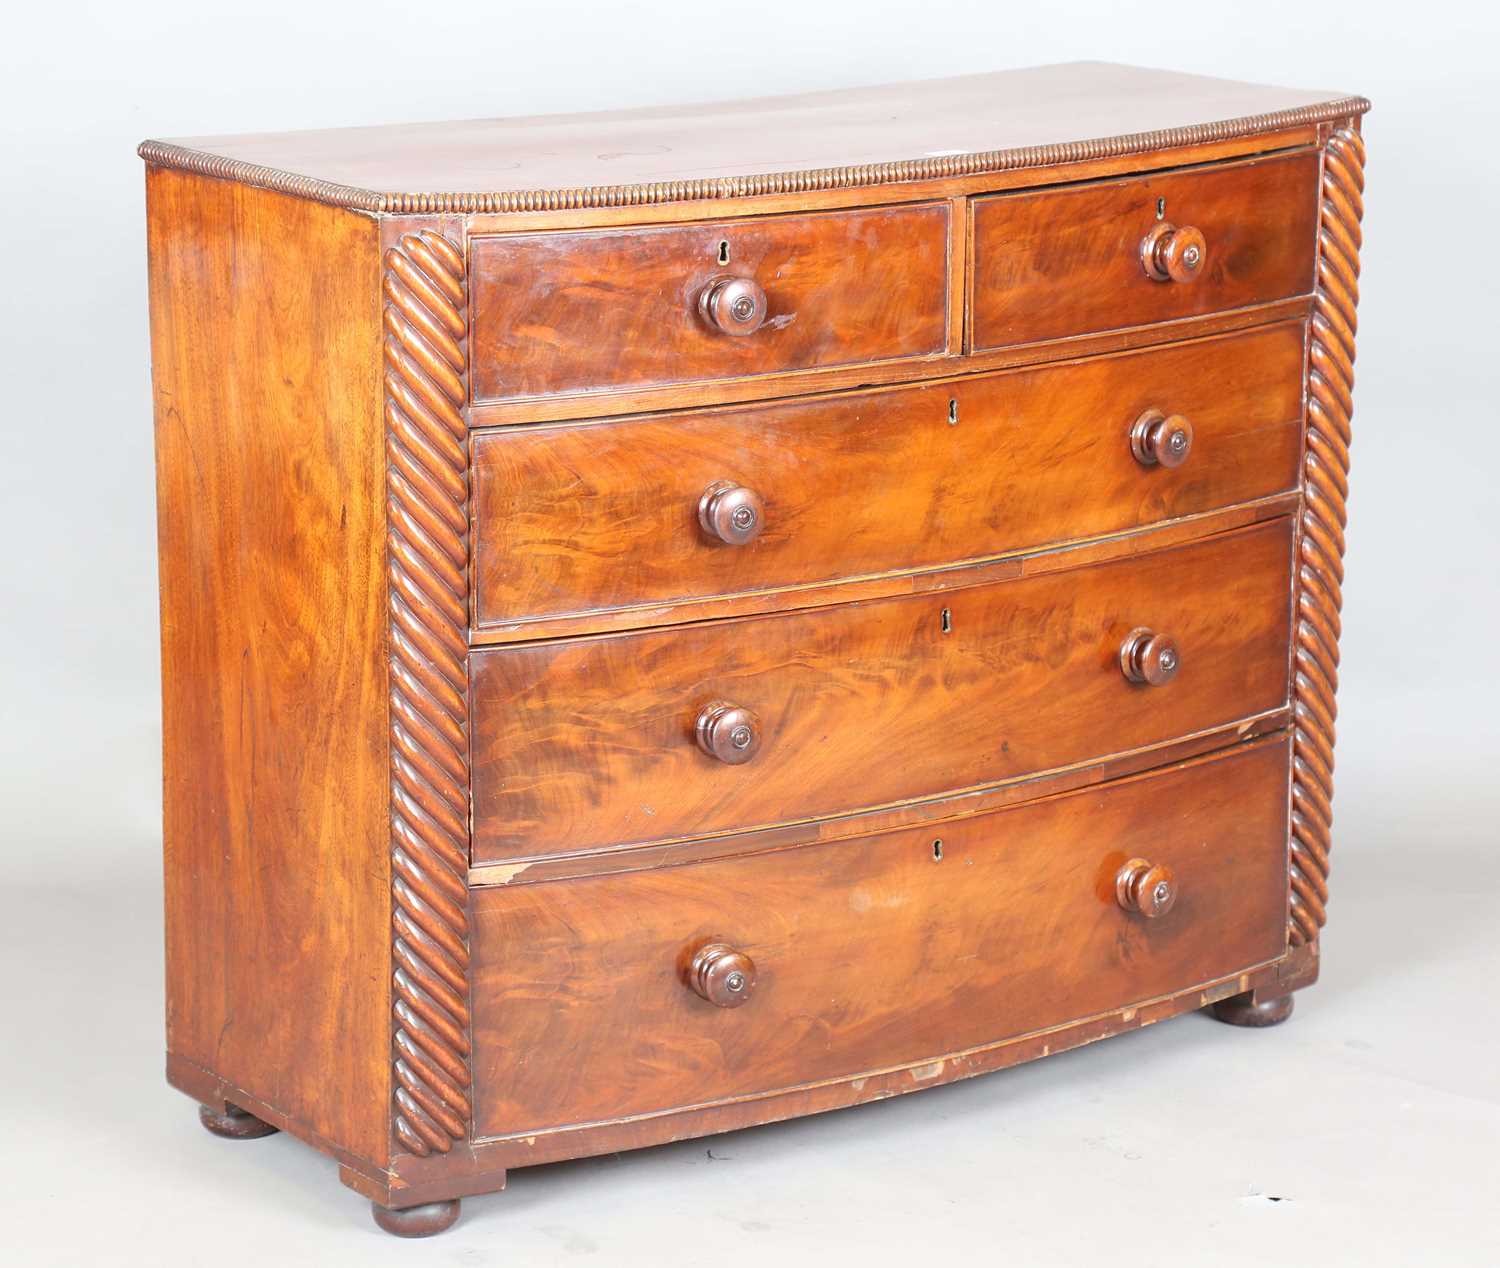 A Victorian mahogany bowfront chest of drawers with reeded pilasters and squat bun feet, height